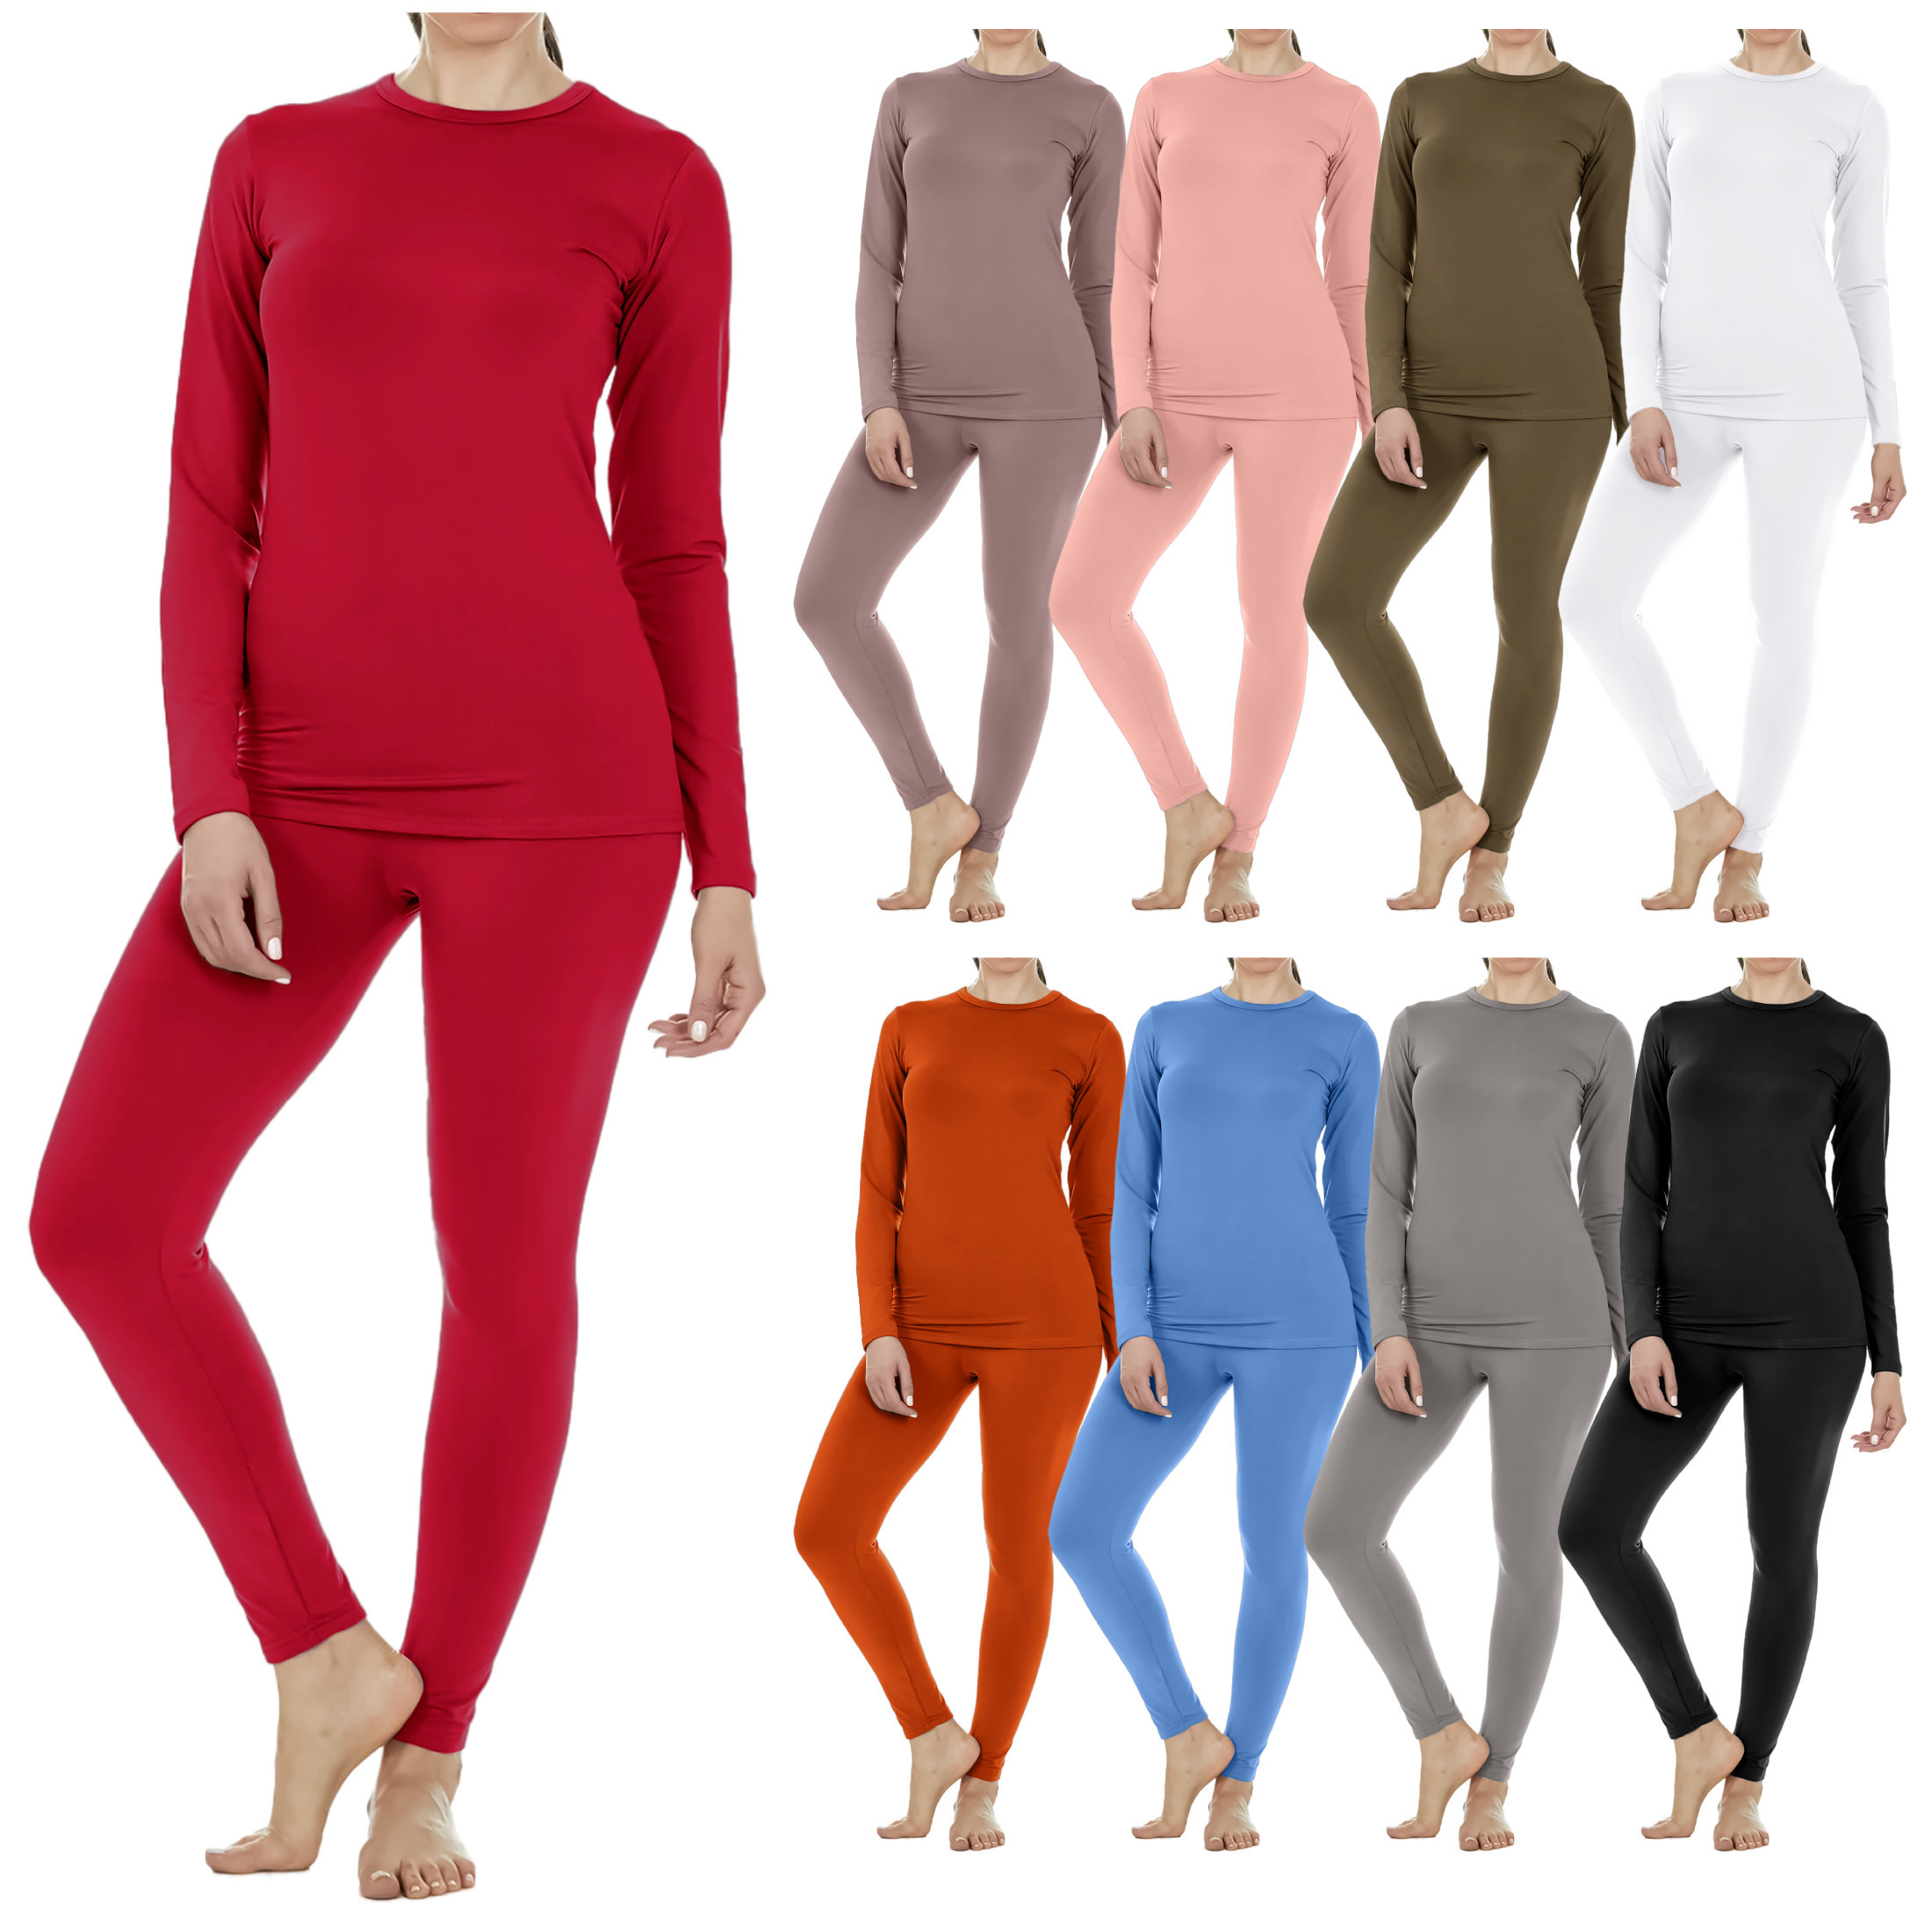 3 Sets: Women's Fleece Lined Thermal Sets For Cold Weather - Small